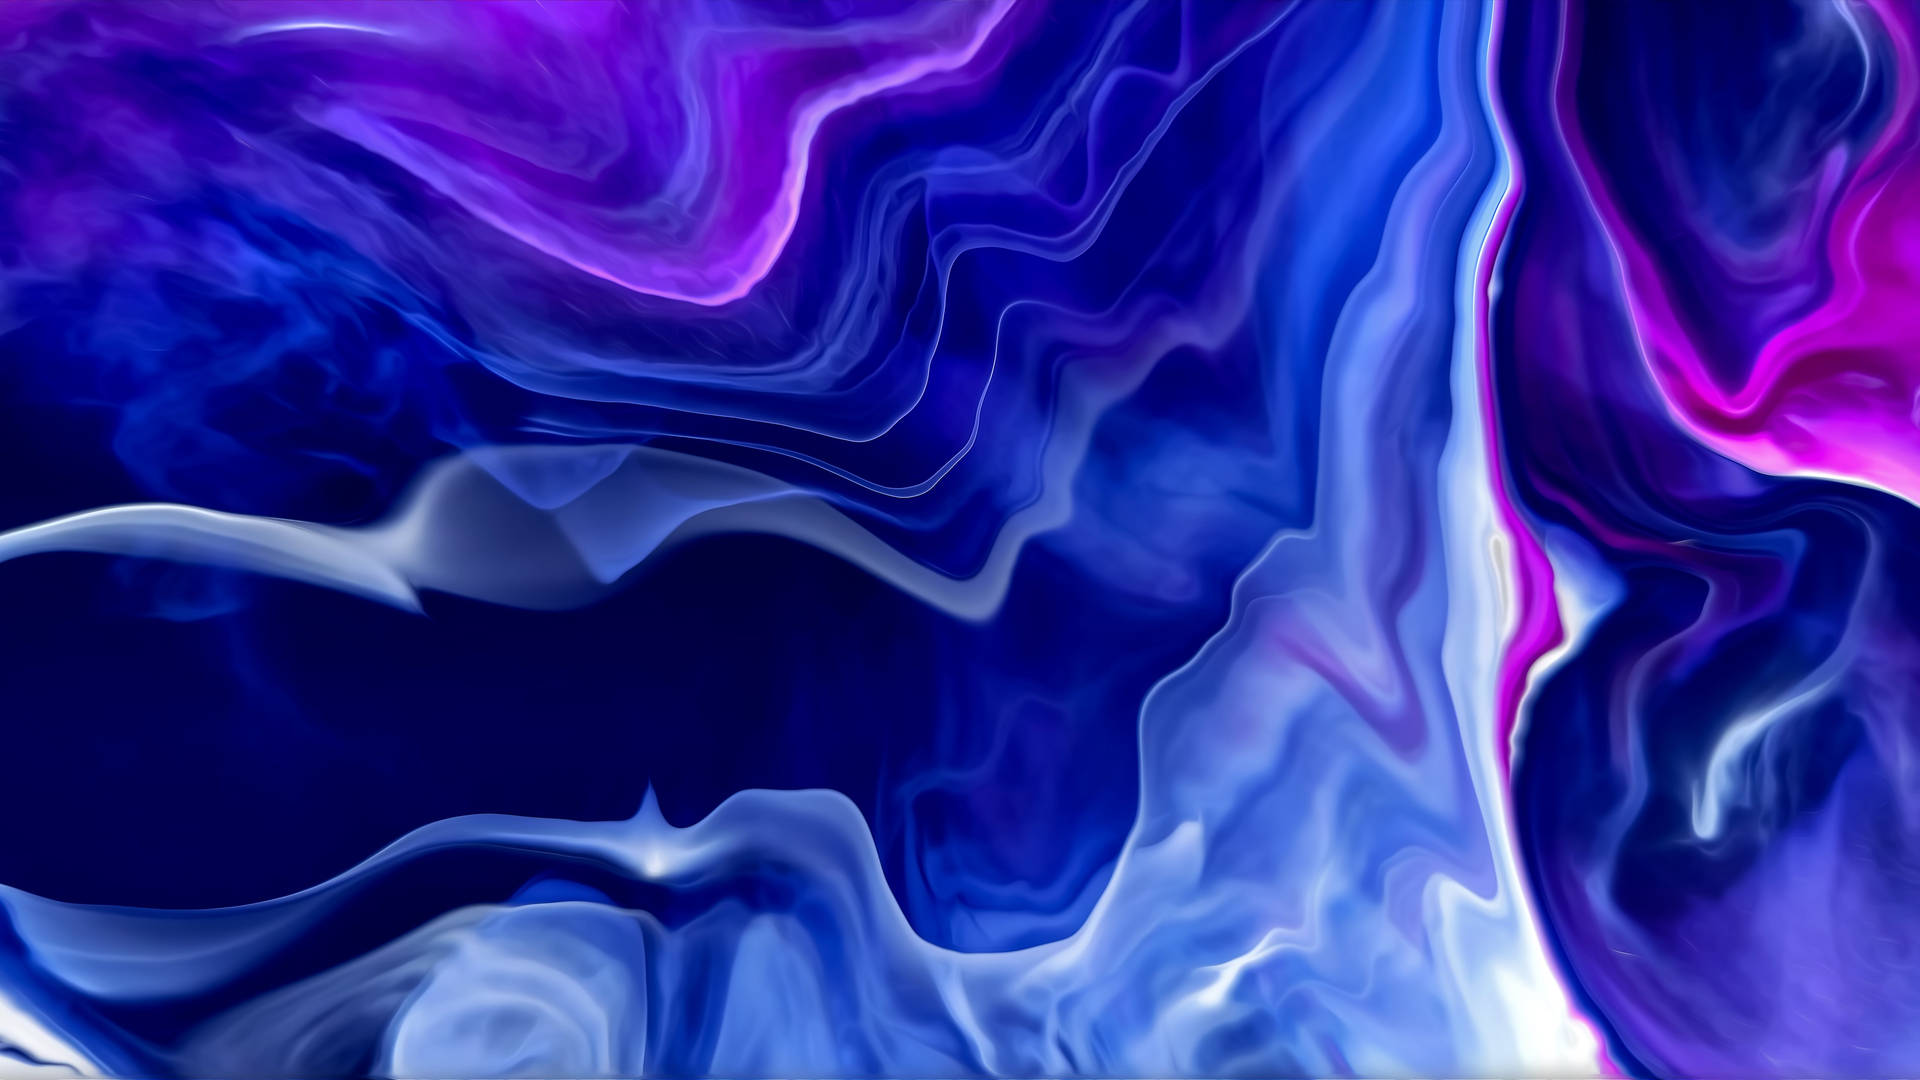 Blue And Pink Liquid Surface Imac 4k Background